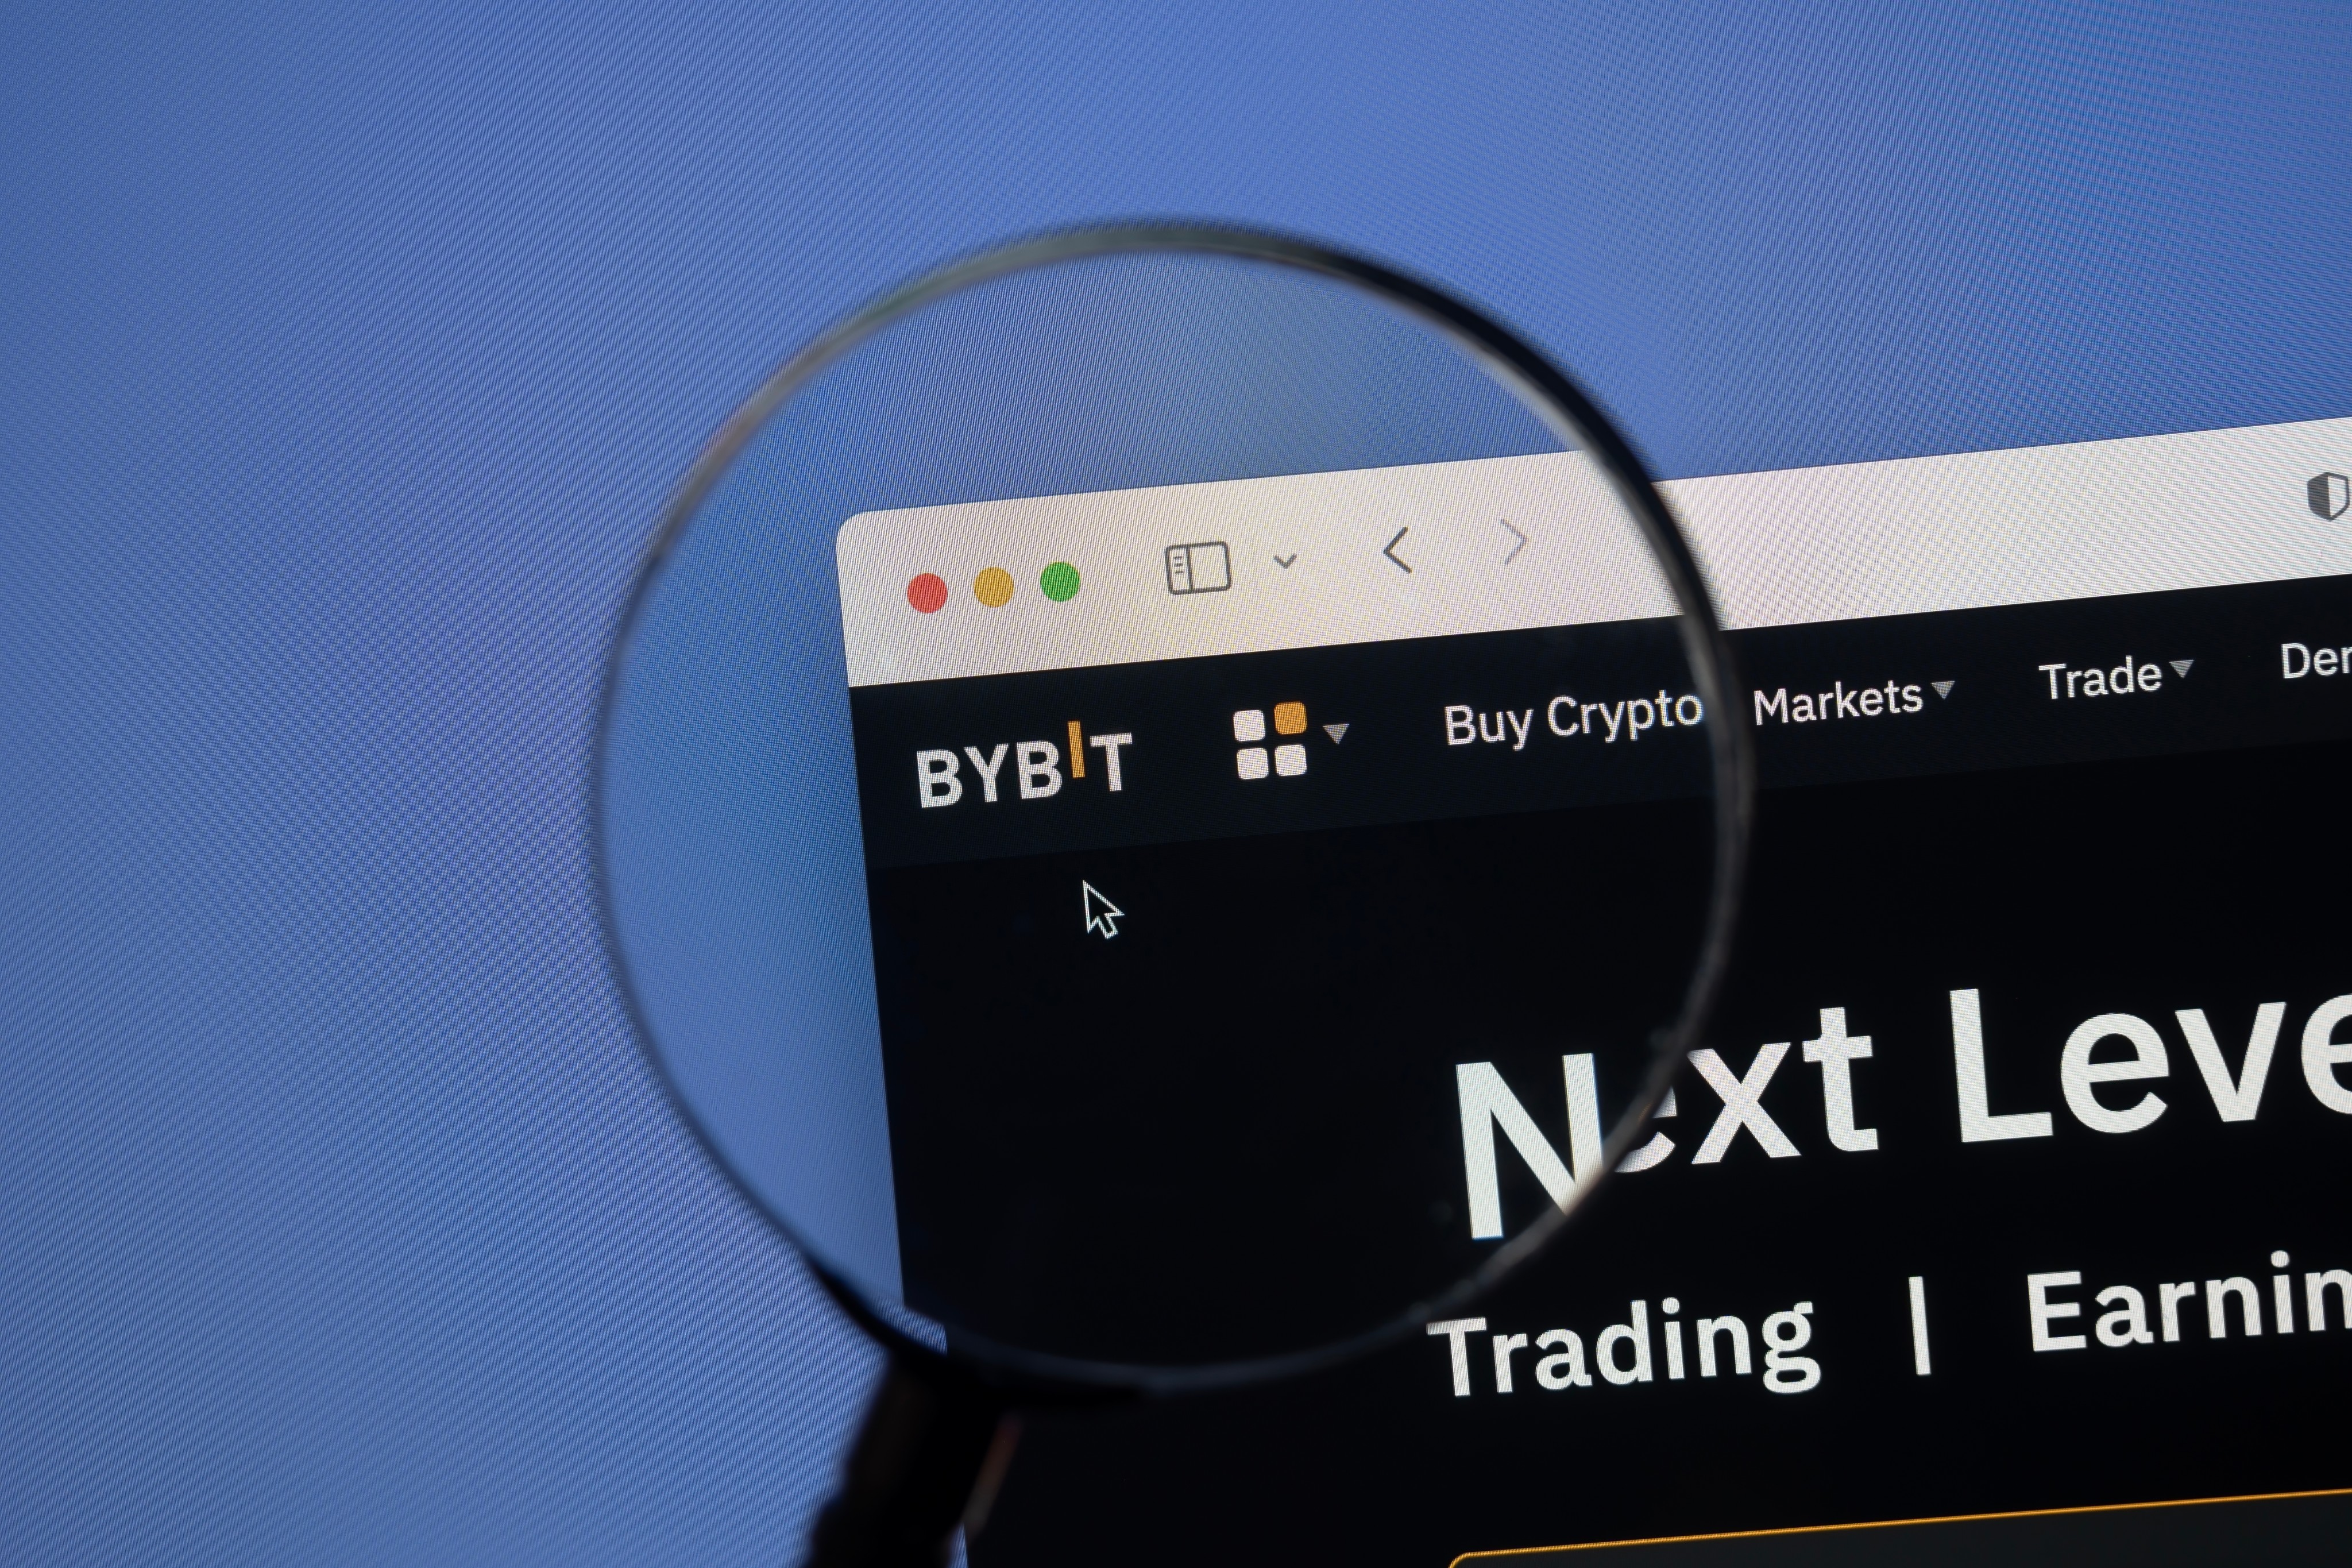 Headquartered in Dubai, Bybit currently has more than 20 million users and handles a daily average trading volume worth more than US$10 billion. Photo: Shutterstock